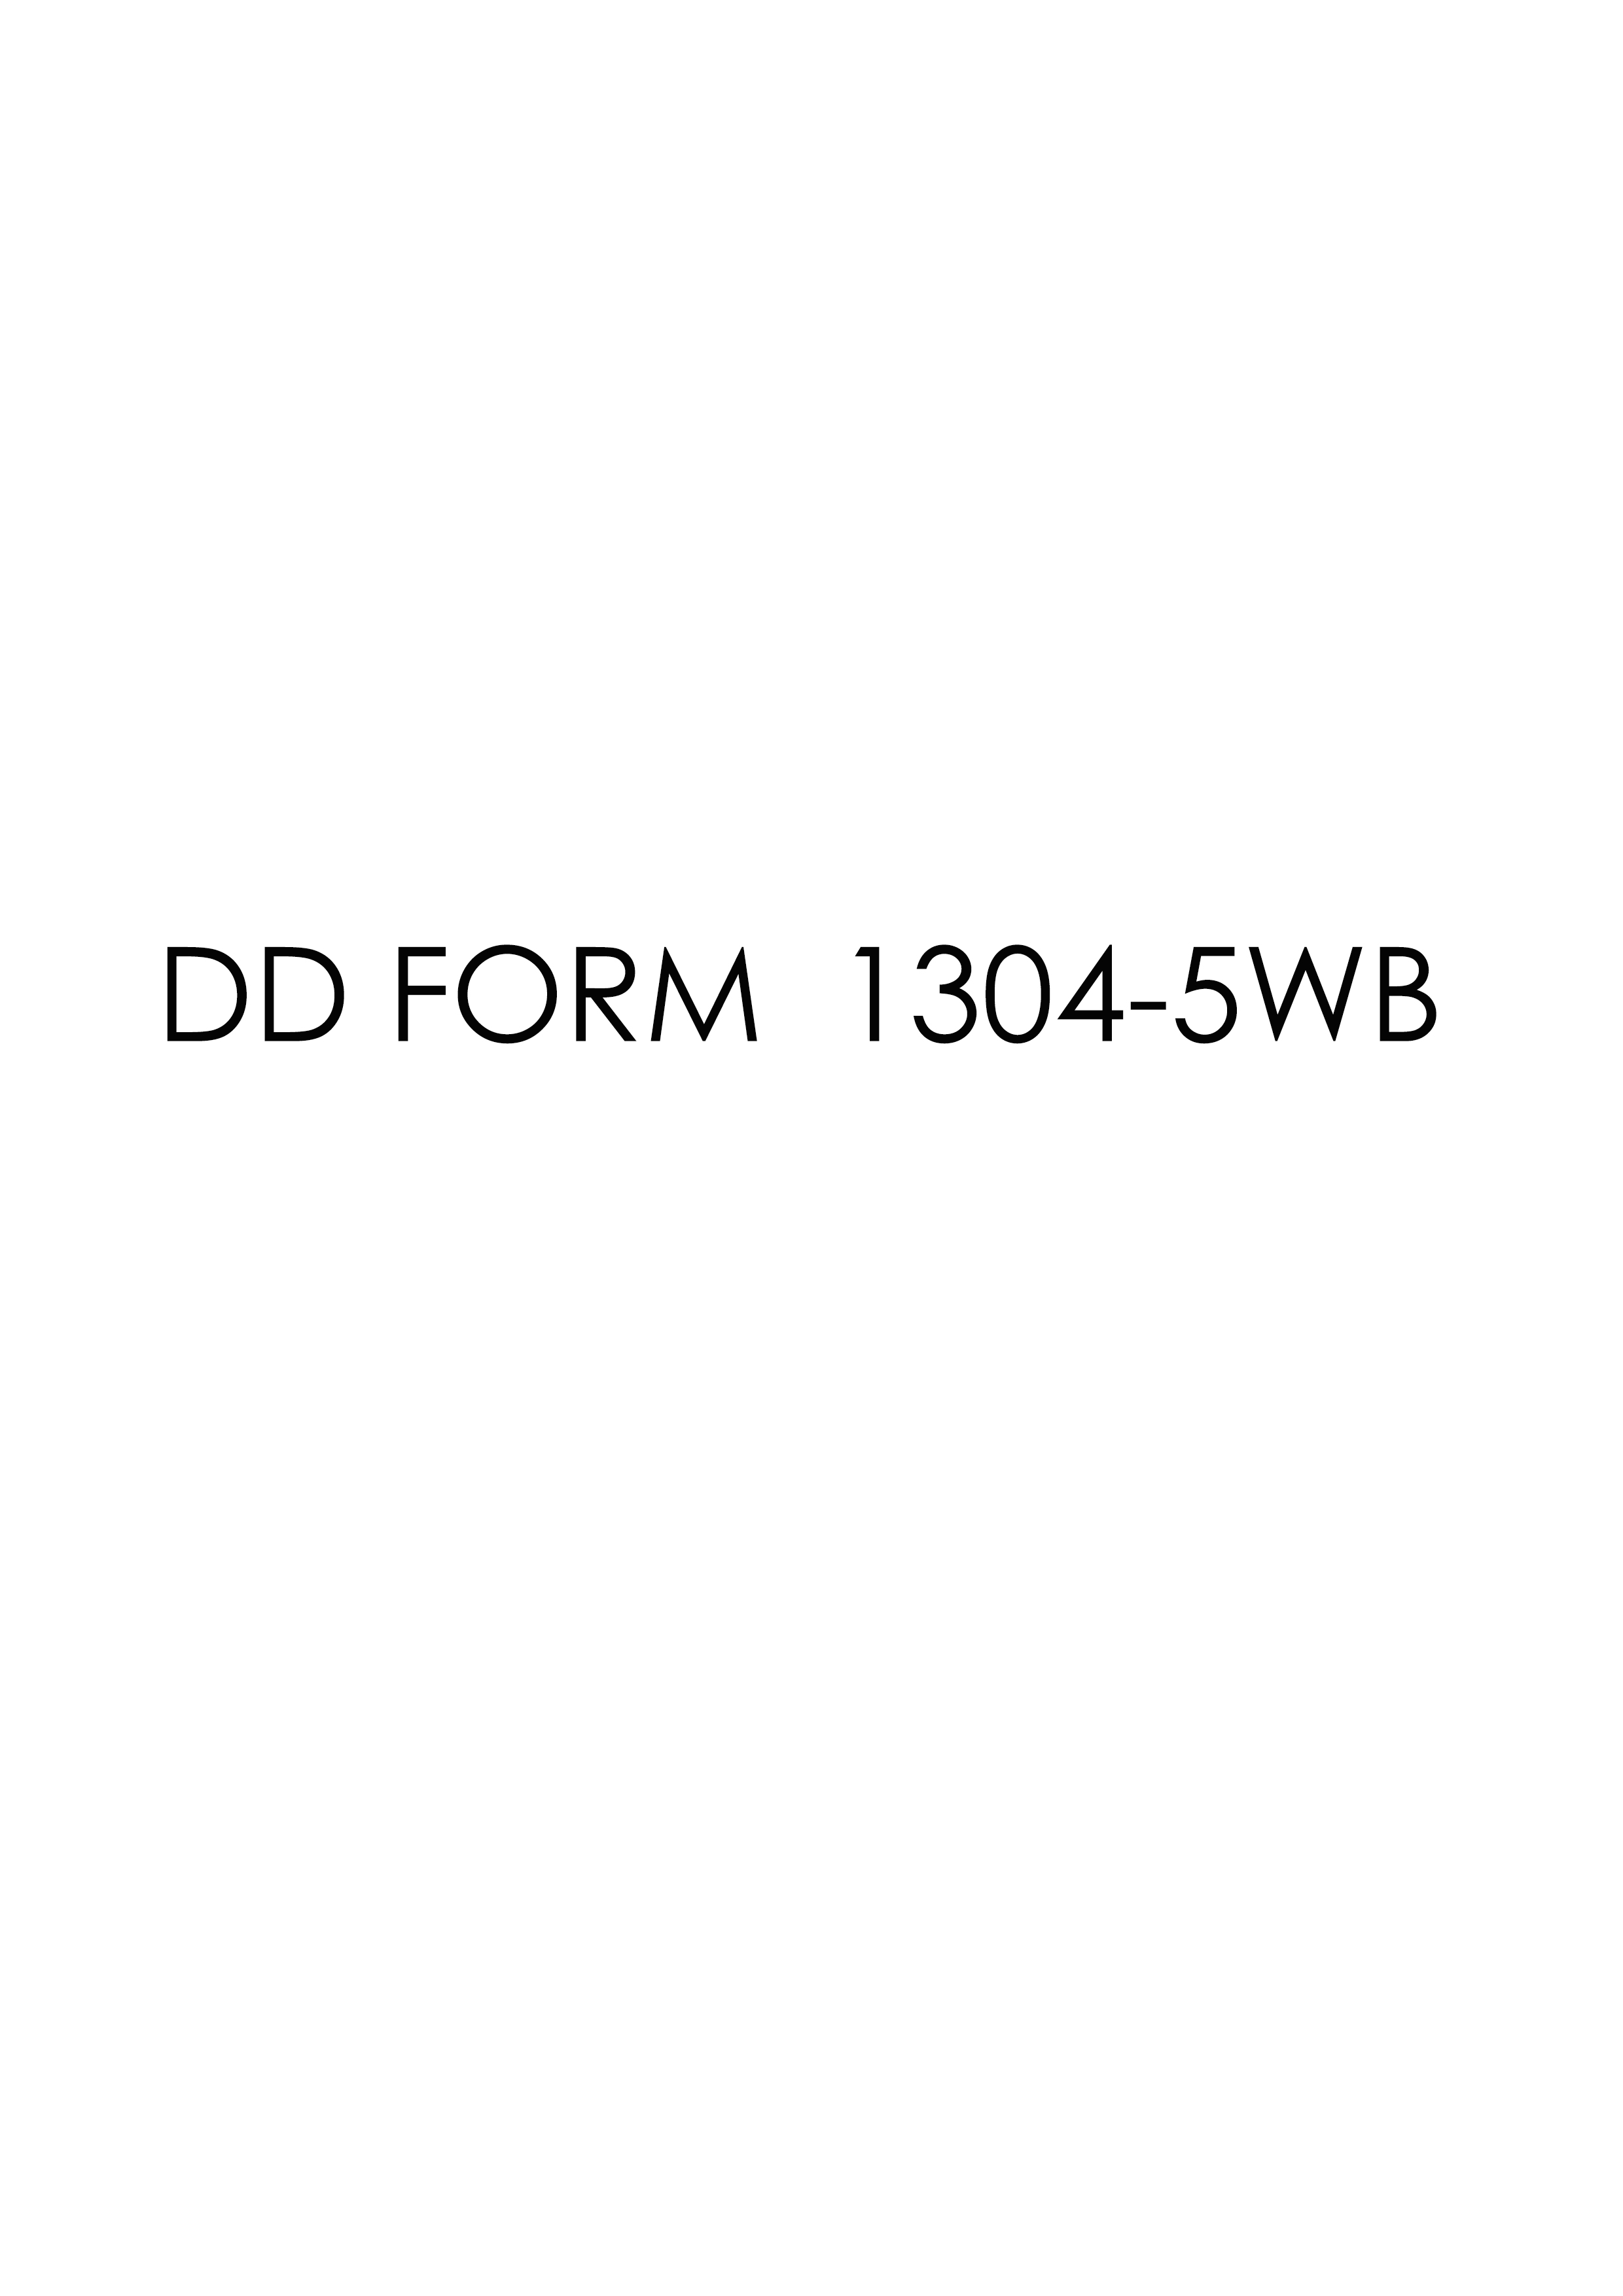 Download Fillable dd Form 1304-5WB